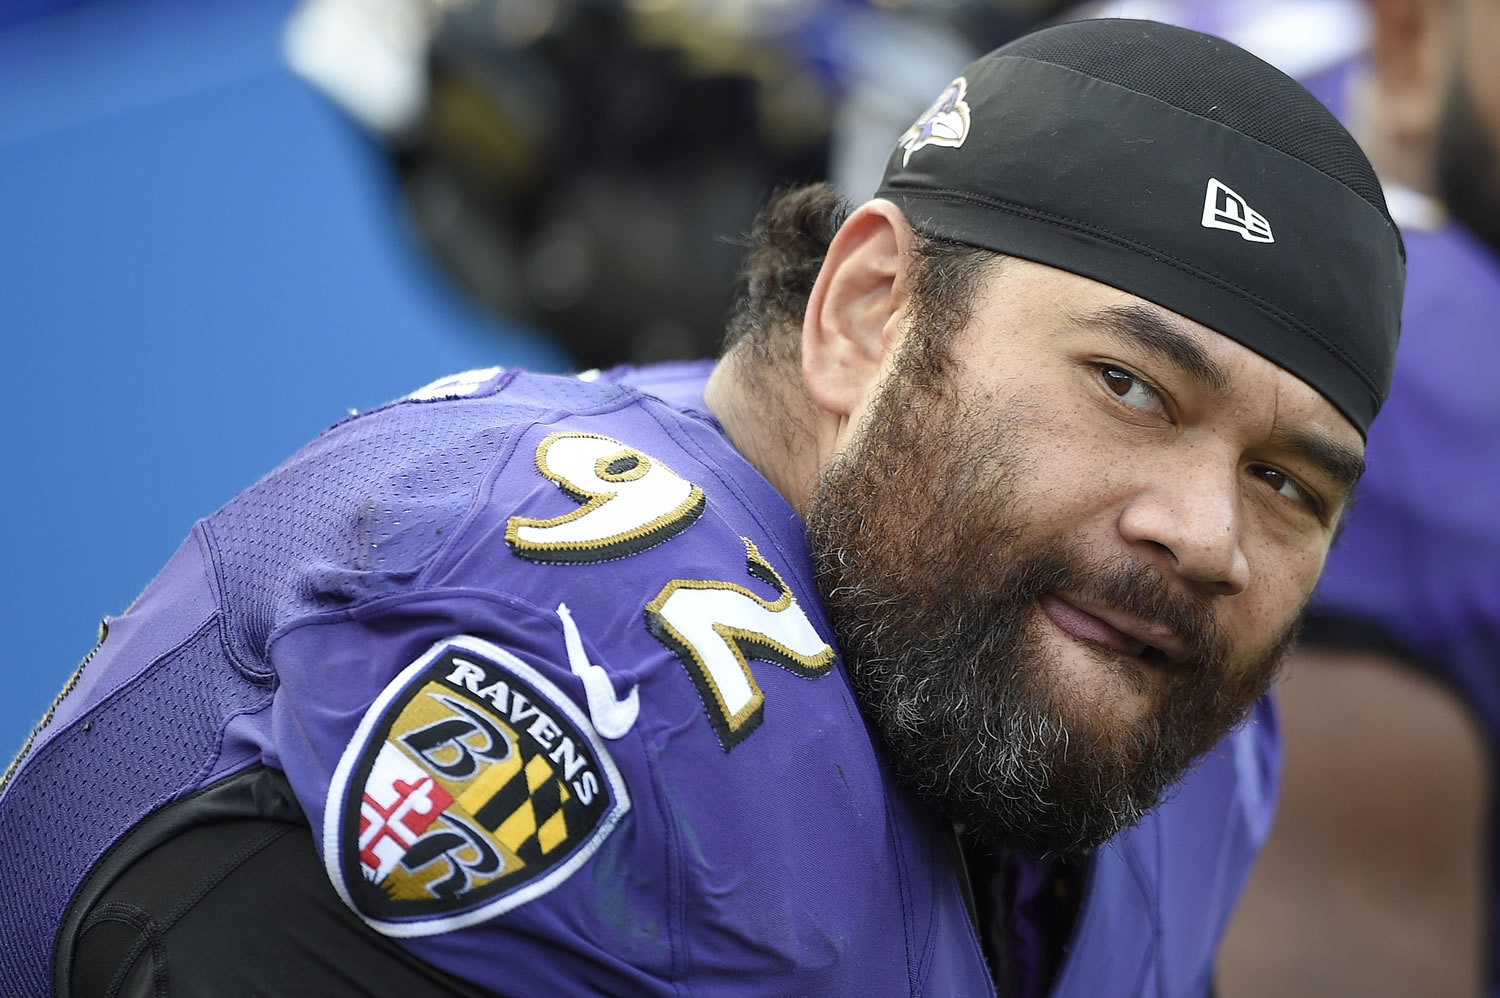 Baltimore Ravens defensive end Haloti Ngata has been suspended without pay for four games for violating the NFL's policy on performance enhancing substances, the league announced Thursday, Dec. 4, 2014.